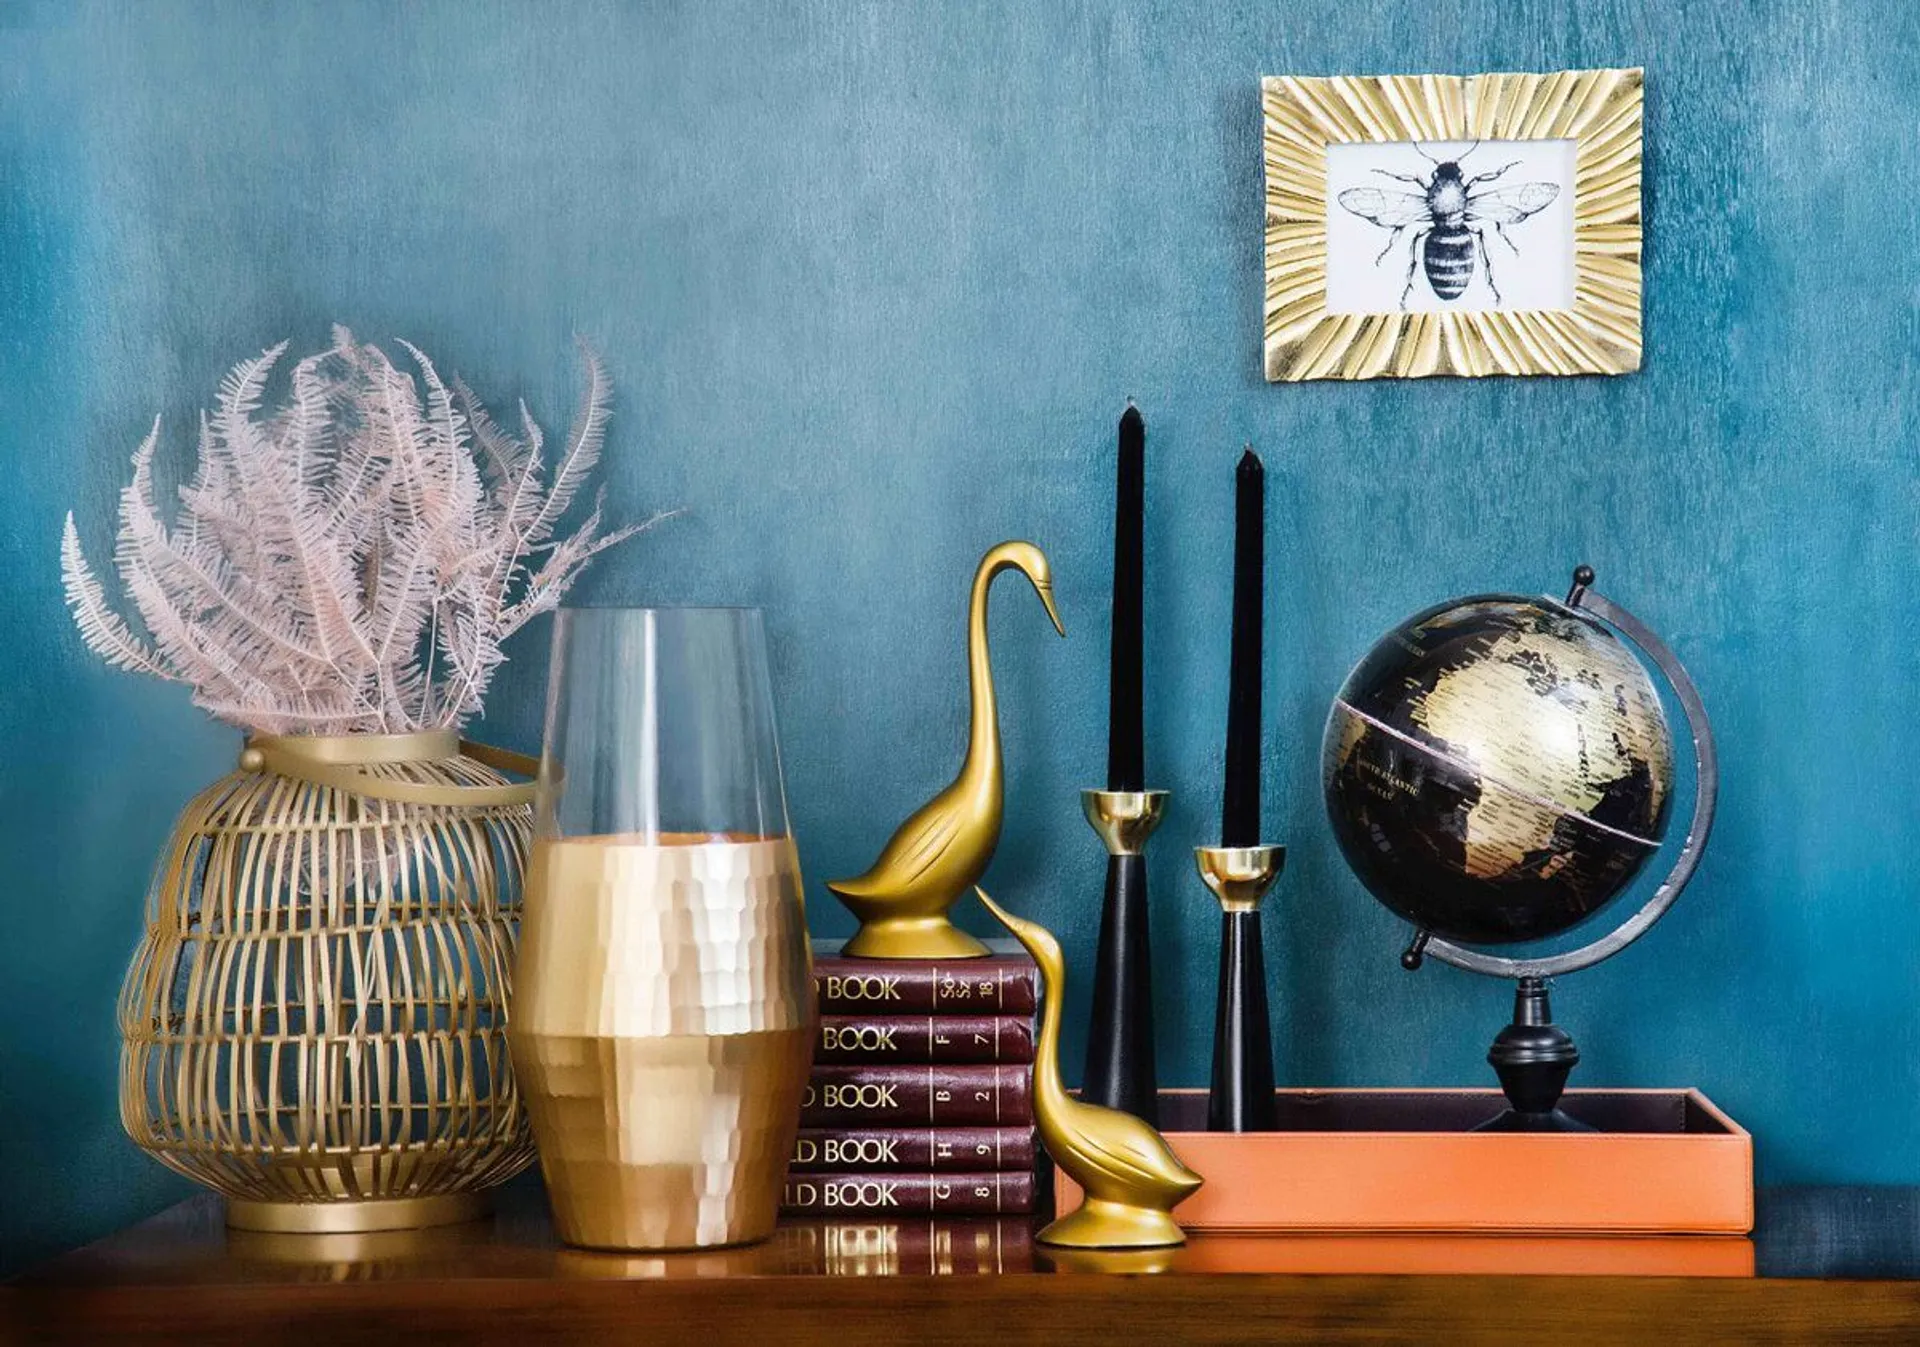 The best stores to redecorate your home on a budget